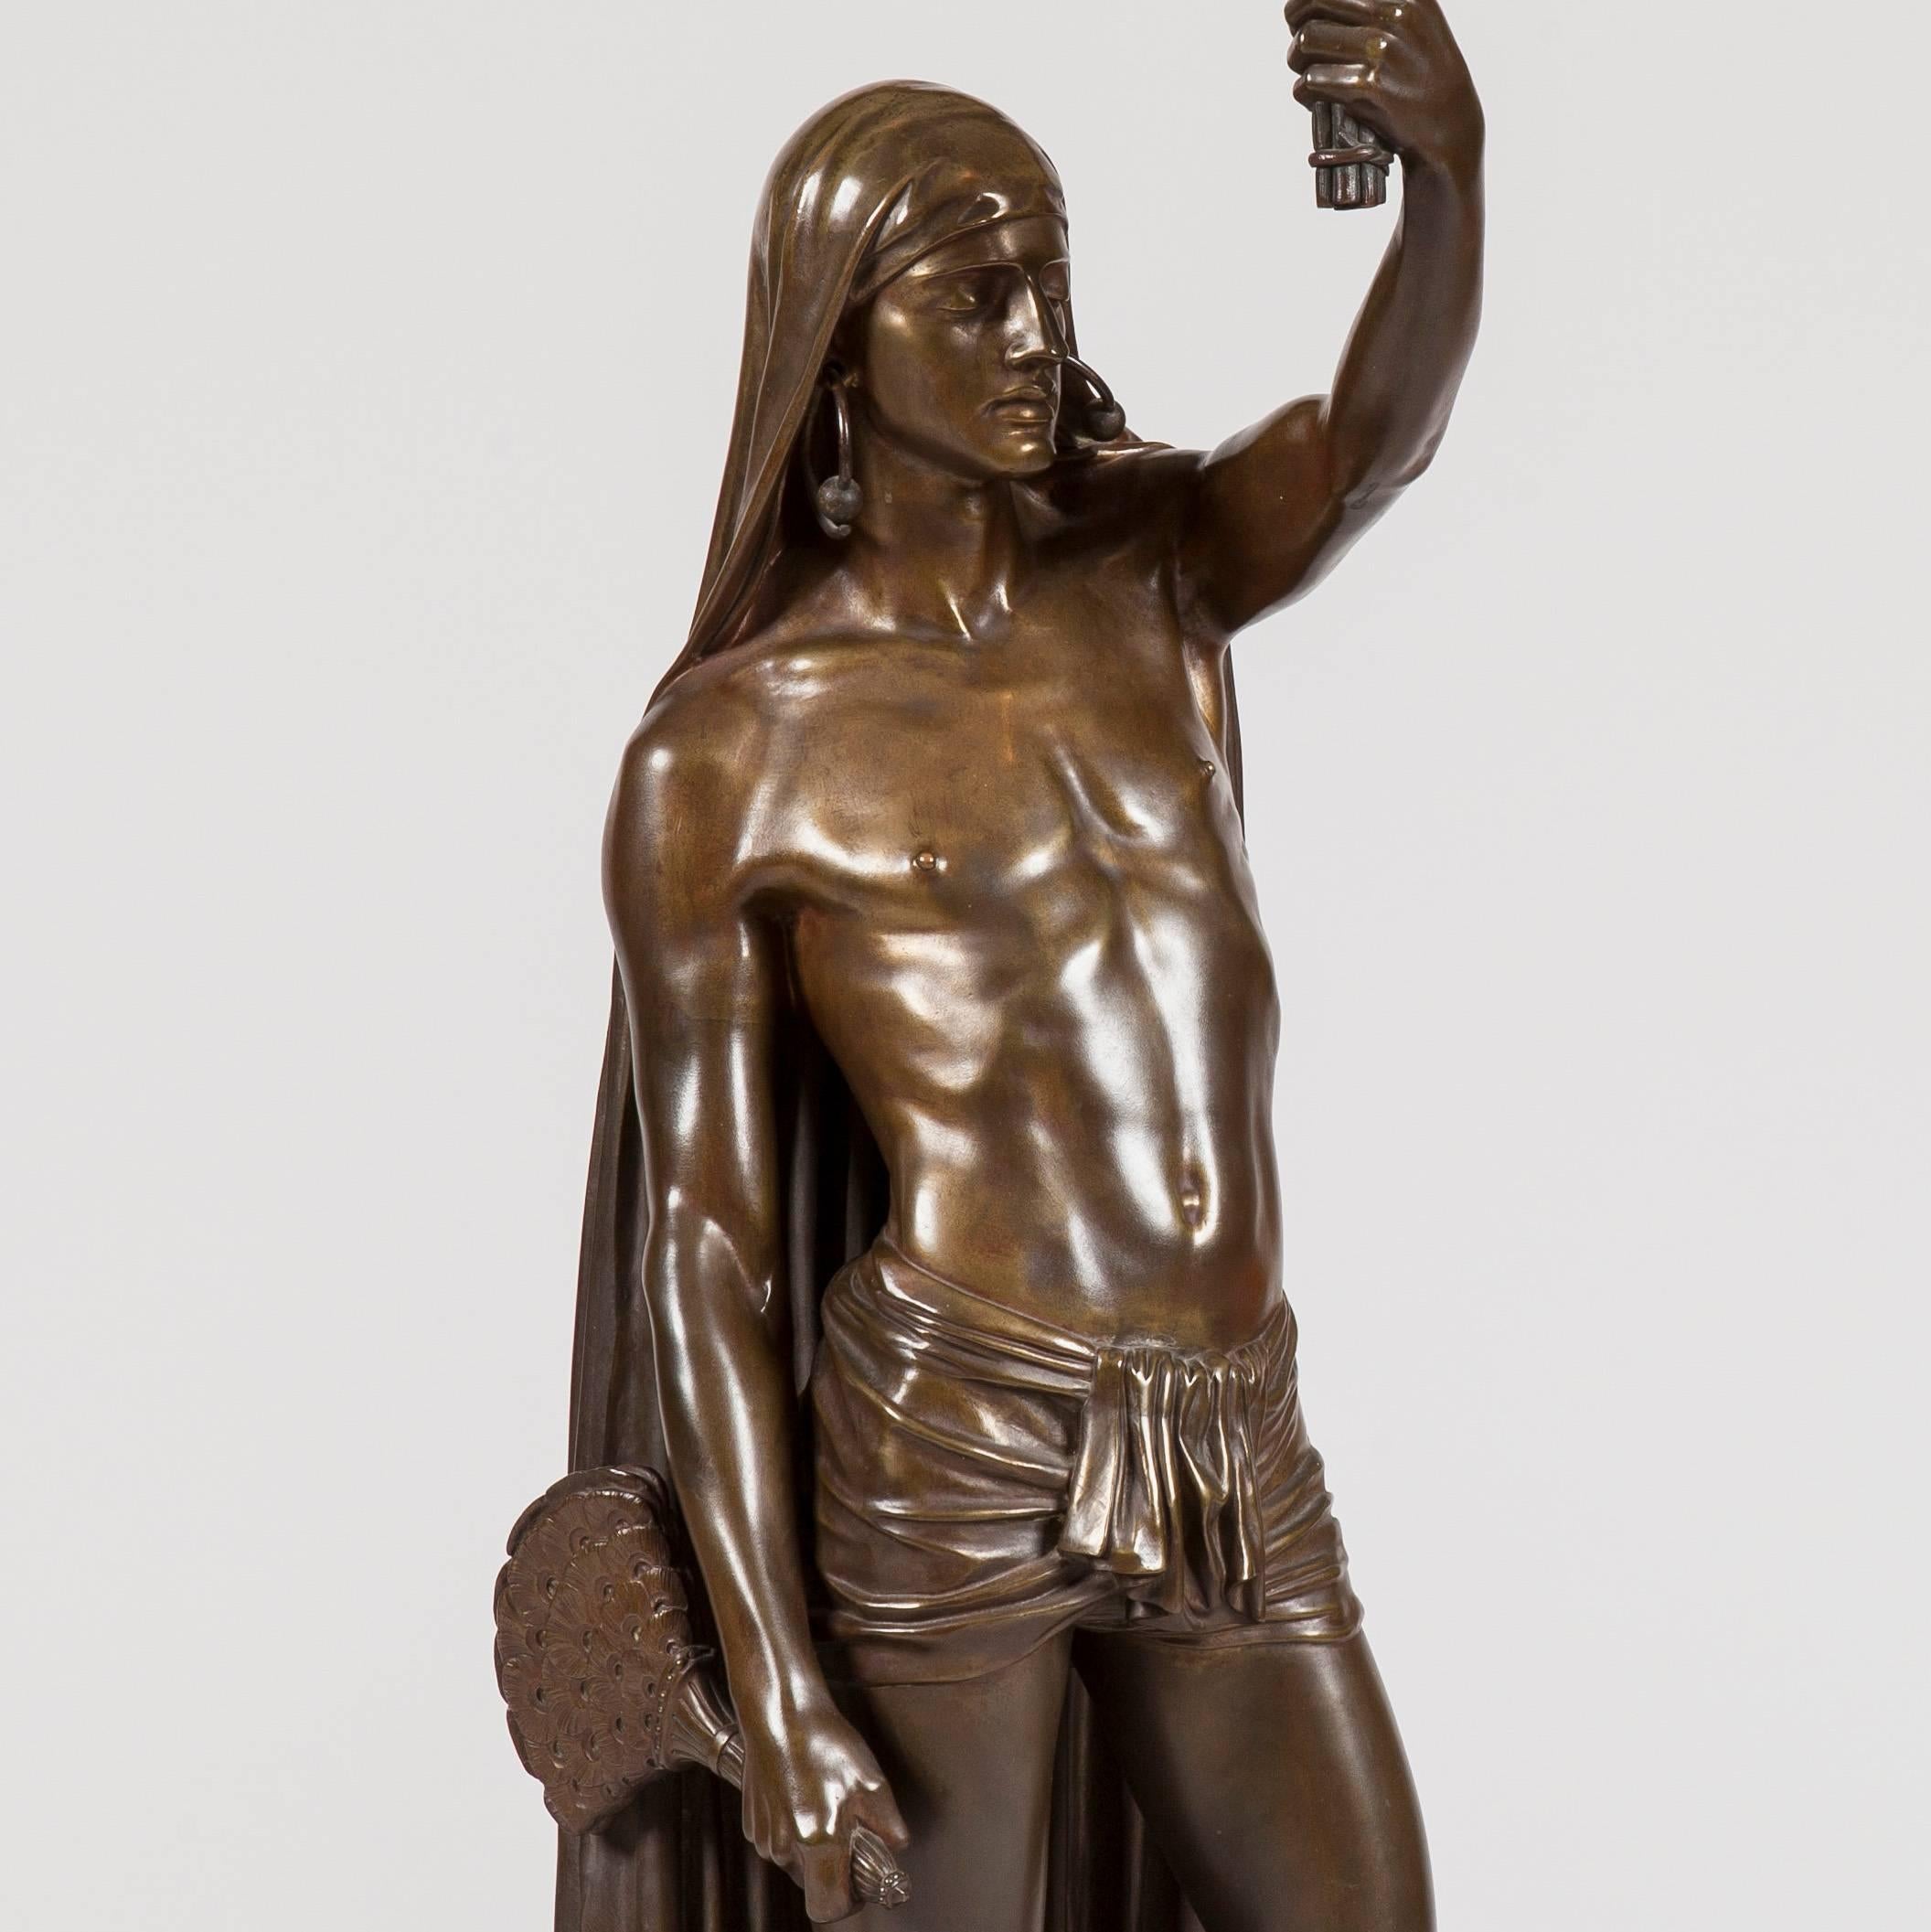 A well patinated bronze figure, representing an American Indian, wearing a draped headdress, robe and a pendant hooped earring. Signed to the plinth 'A.Tossaint 1850', and the foundry, 'Graux-Marly, Fat. de Bronze'
France, circa 1850

The